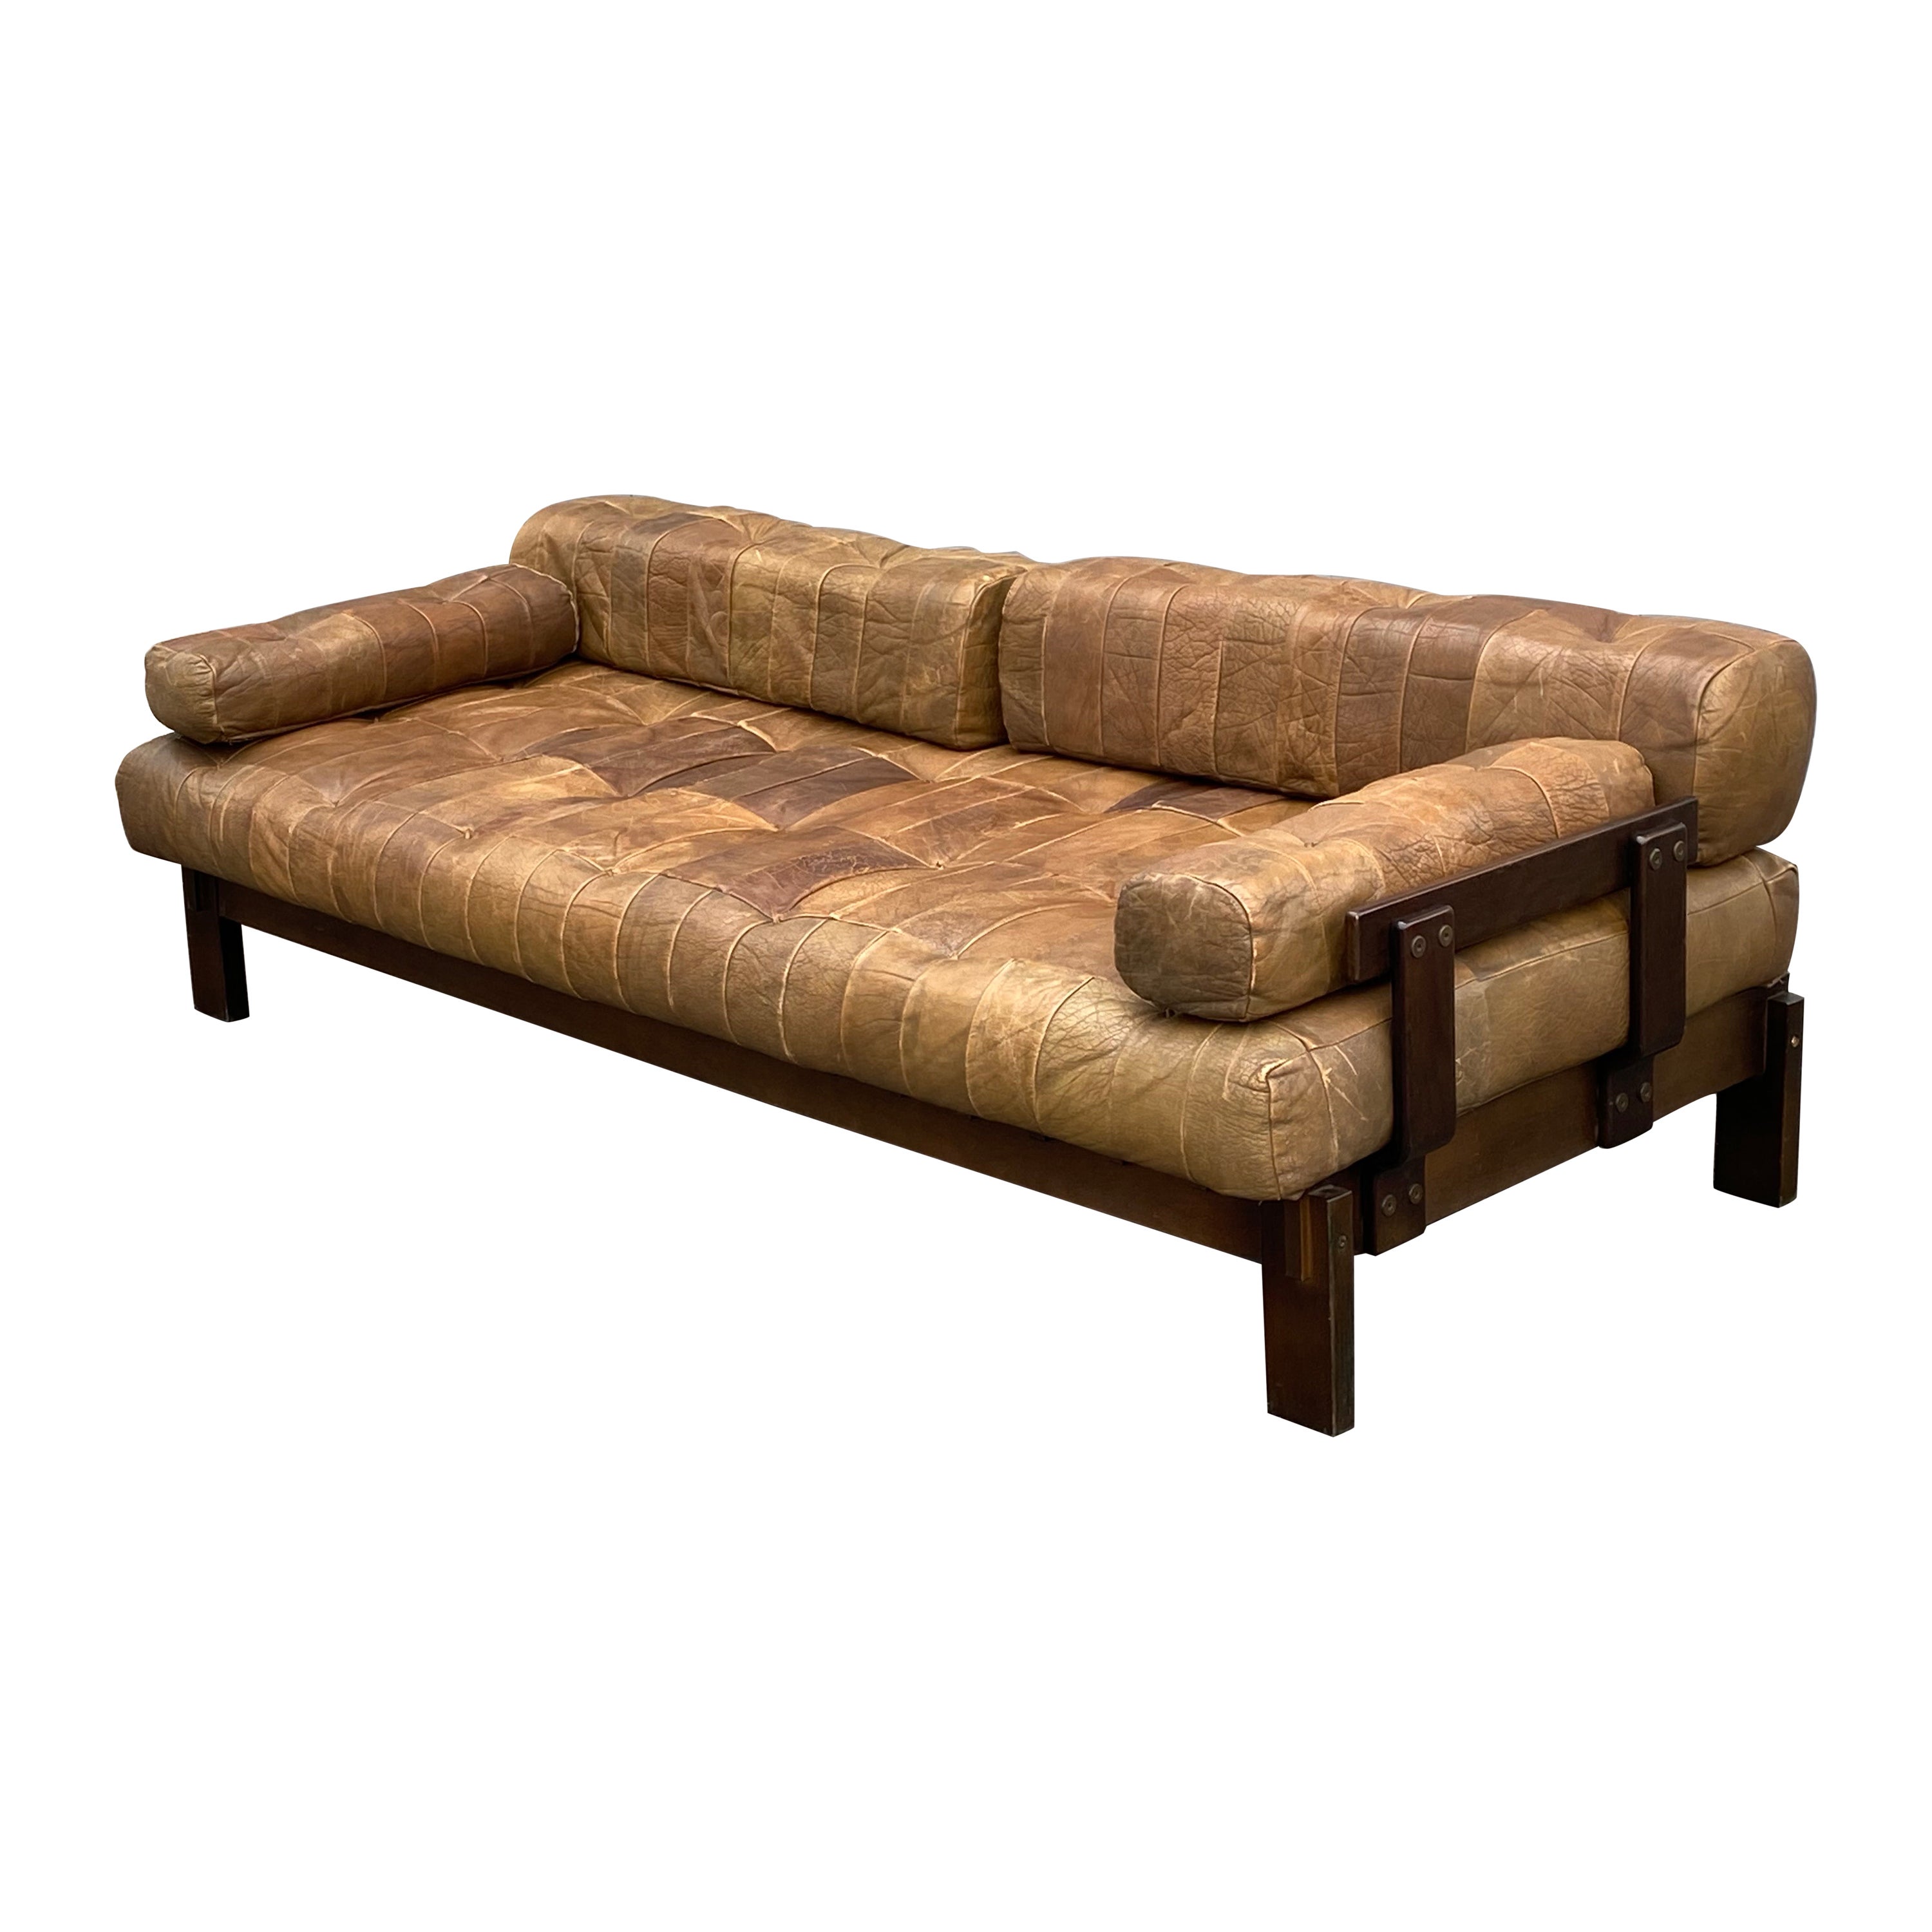 Vintage Leather Patchwork Sofa Daybed, Circa 1970s